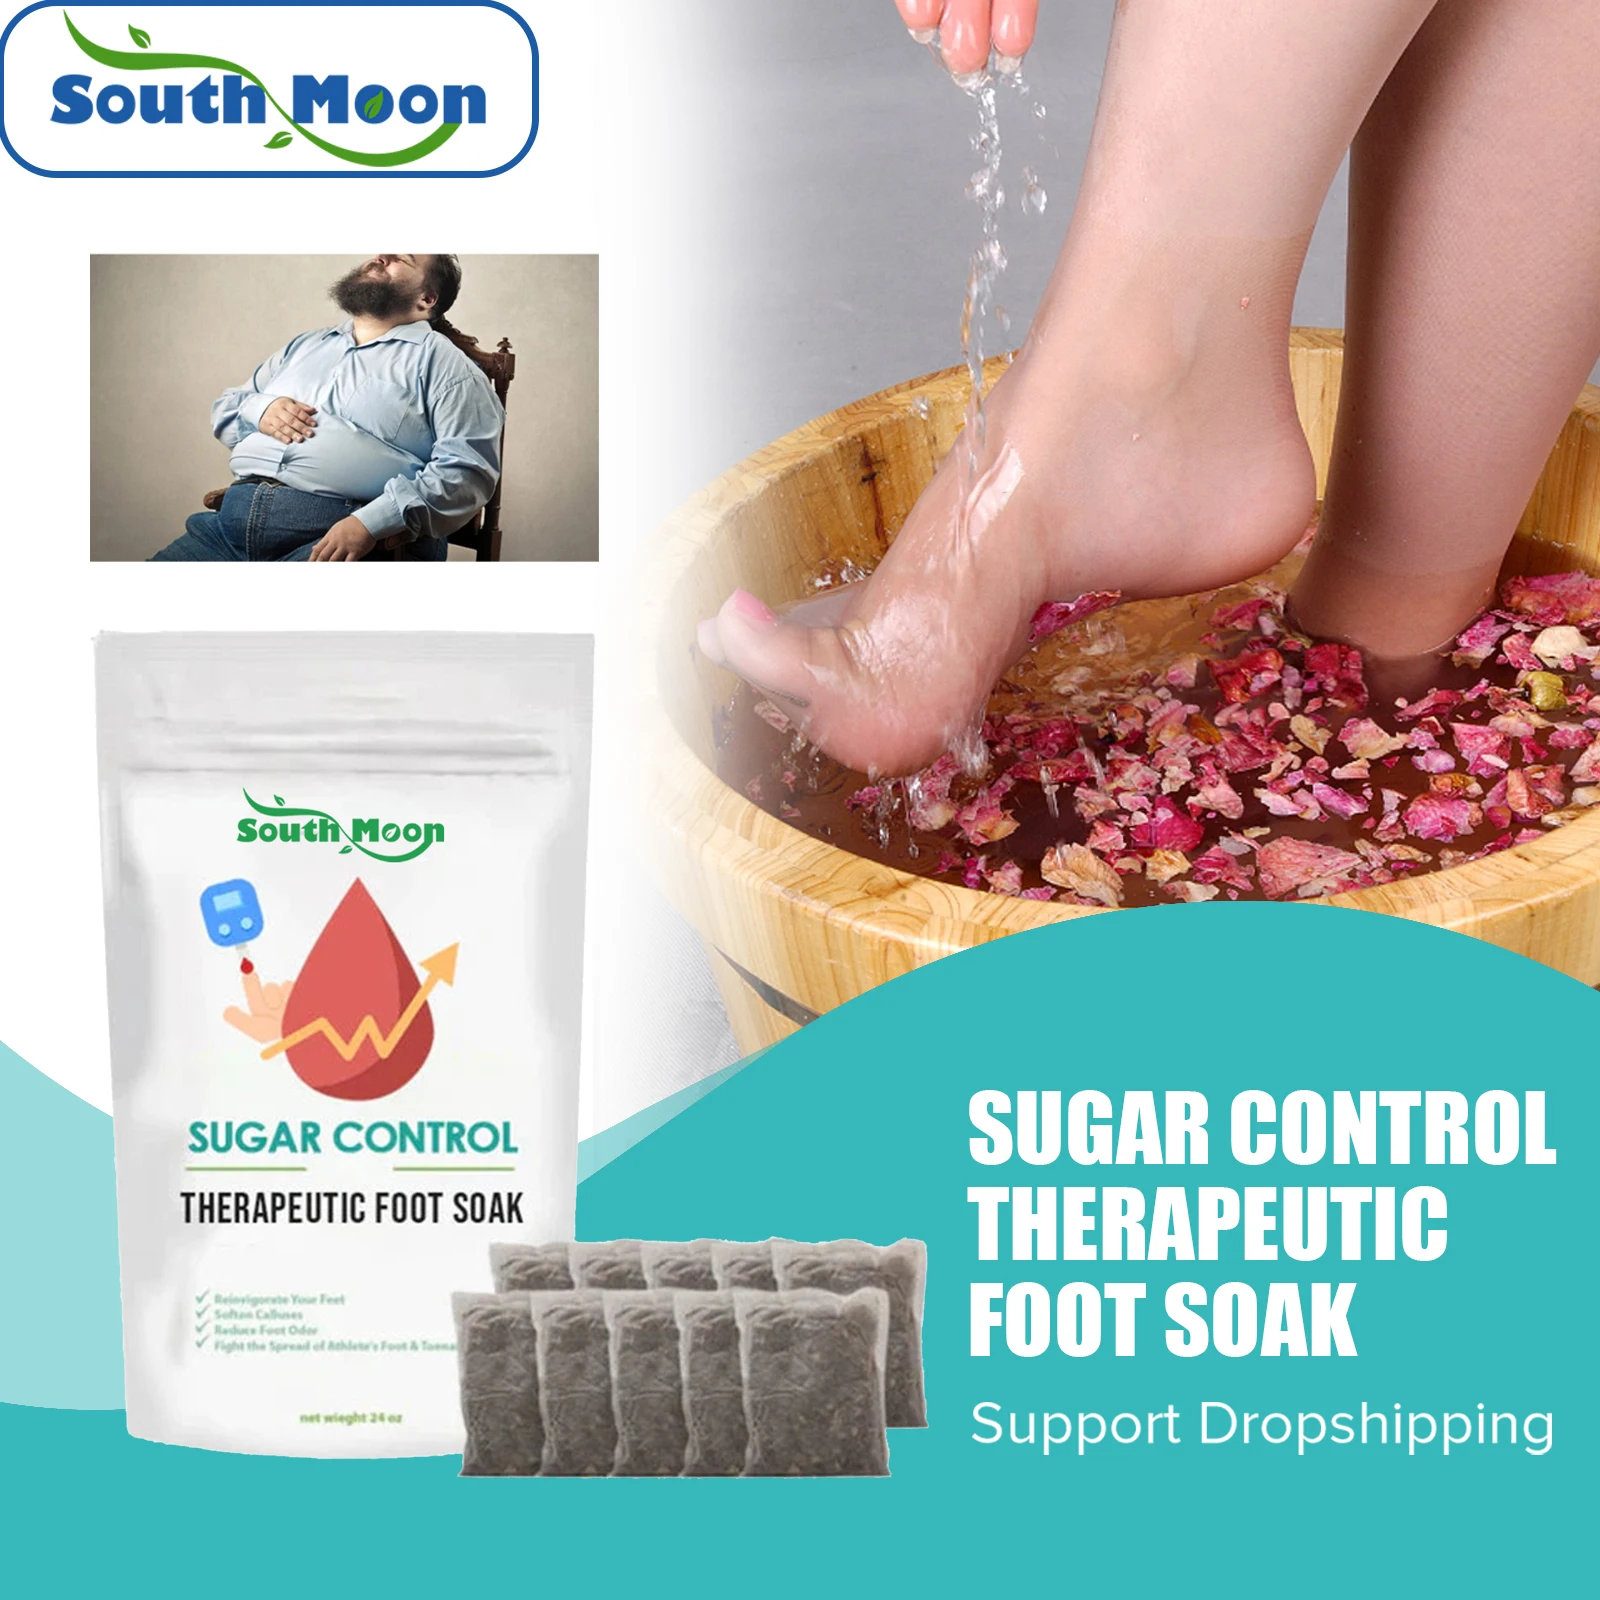 South Moon Diabetes Treatment Sugar Control Therapeutic Chinese Herb Foot Soak Bags Detox Glycemic Support Health Care Products